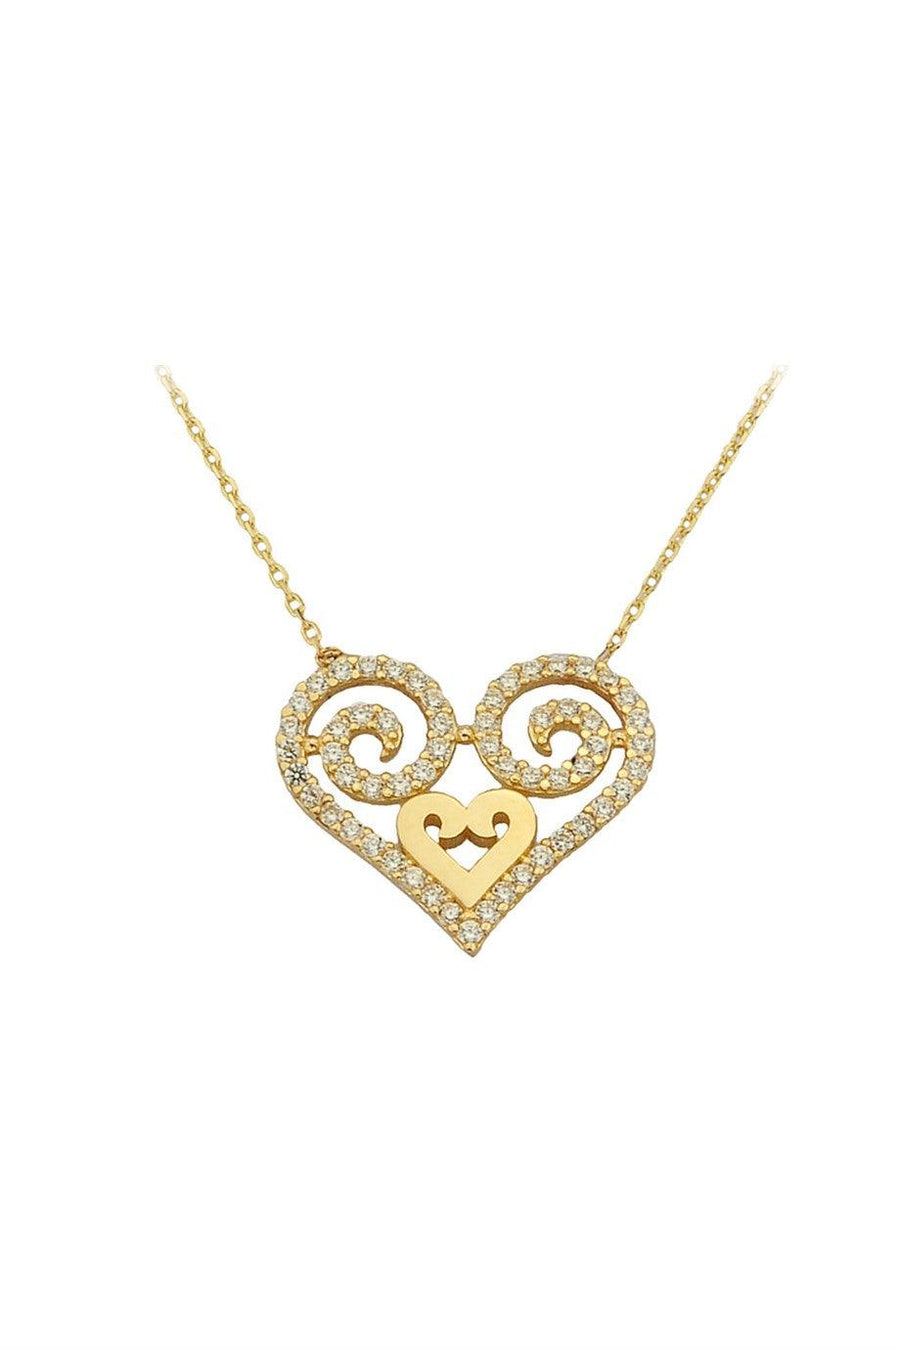 Gold -Hearted Necklace